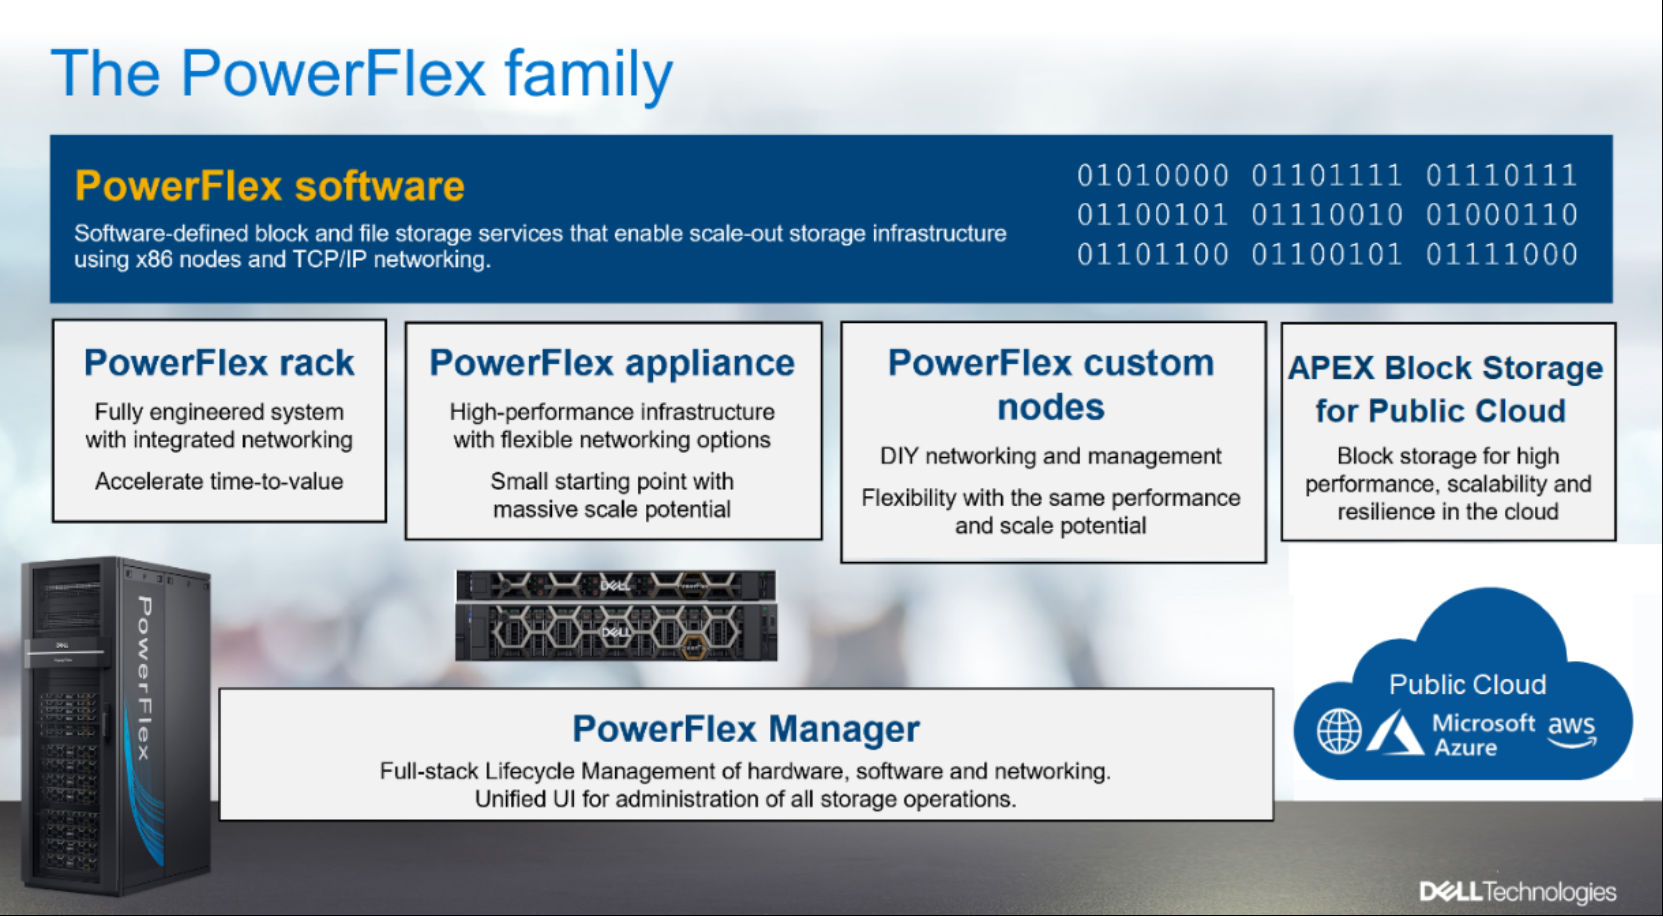 This image shows the powerFlex family components.